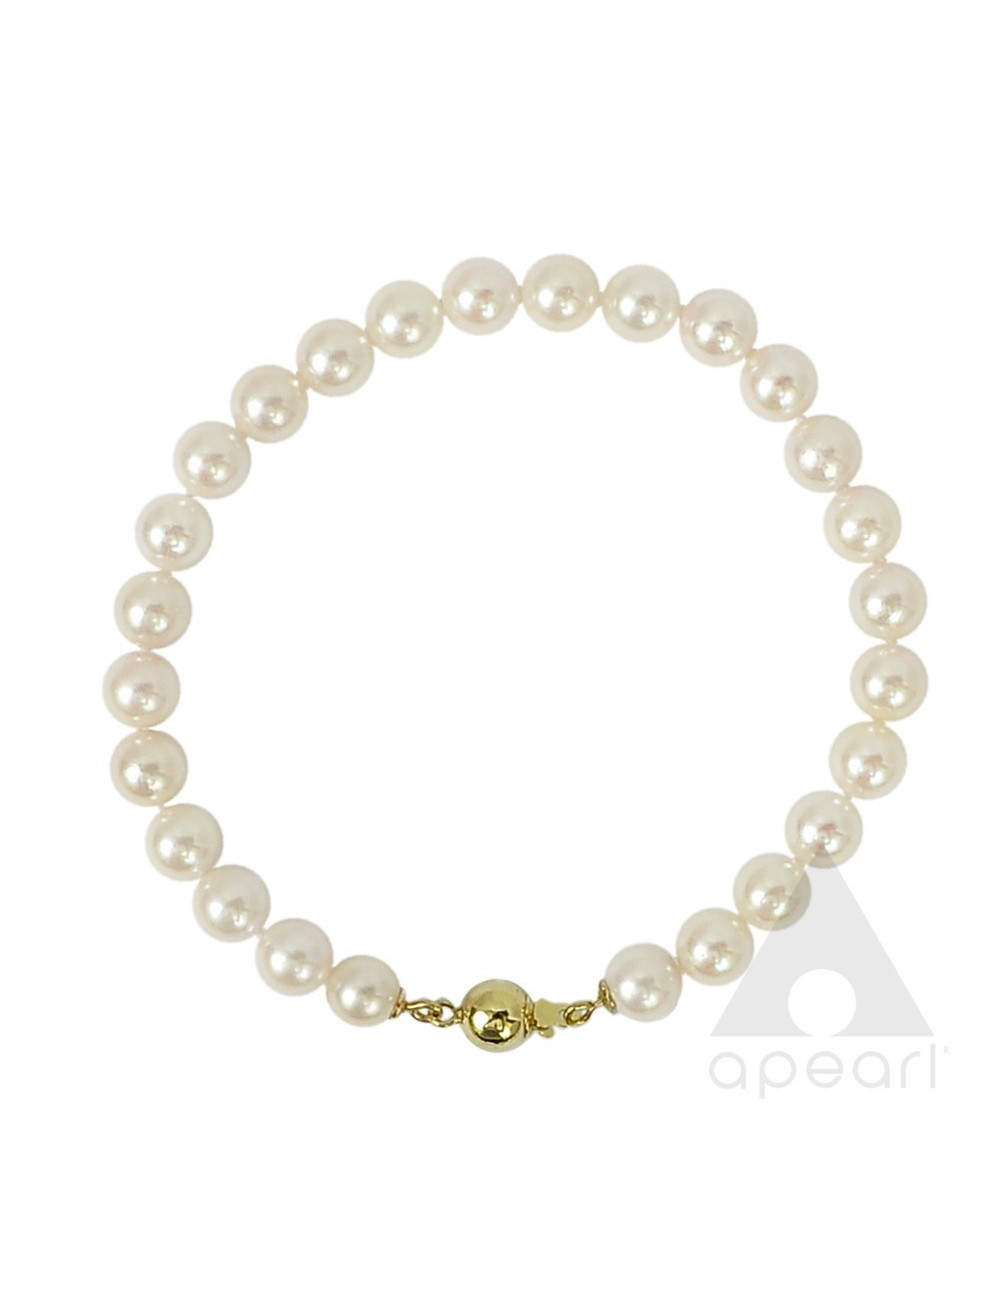 Bracelet with small white Akoya pearls and yellow gold ball clasp Bm665G3